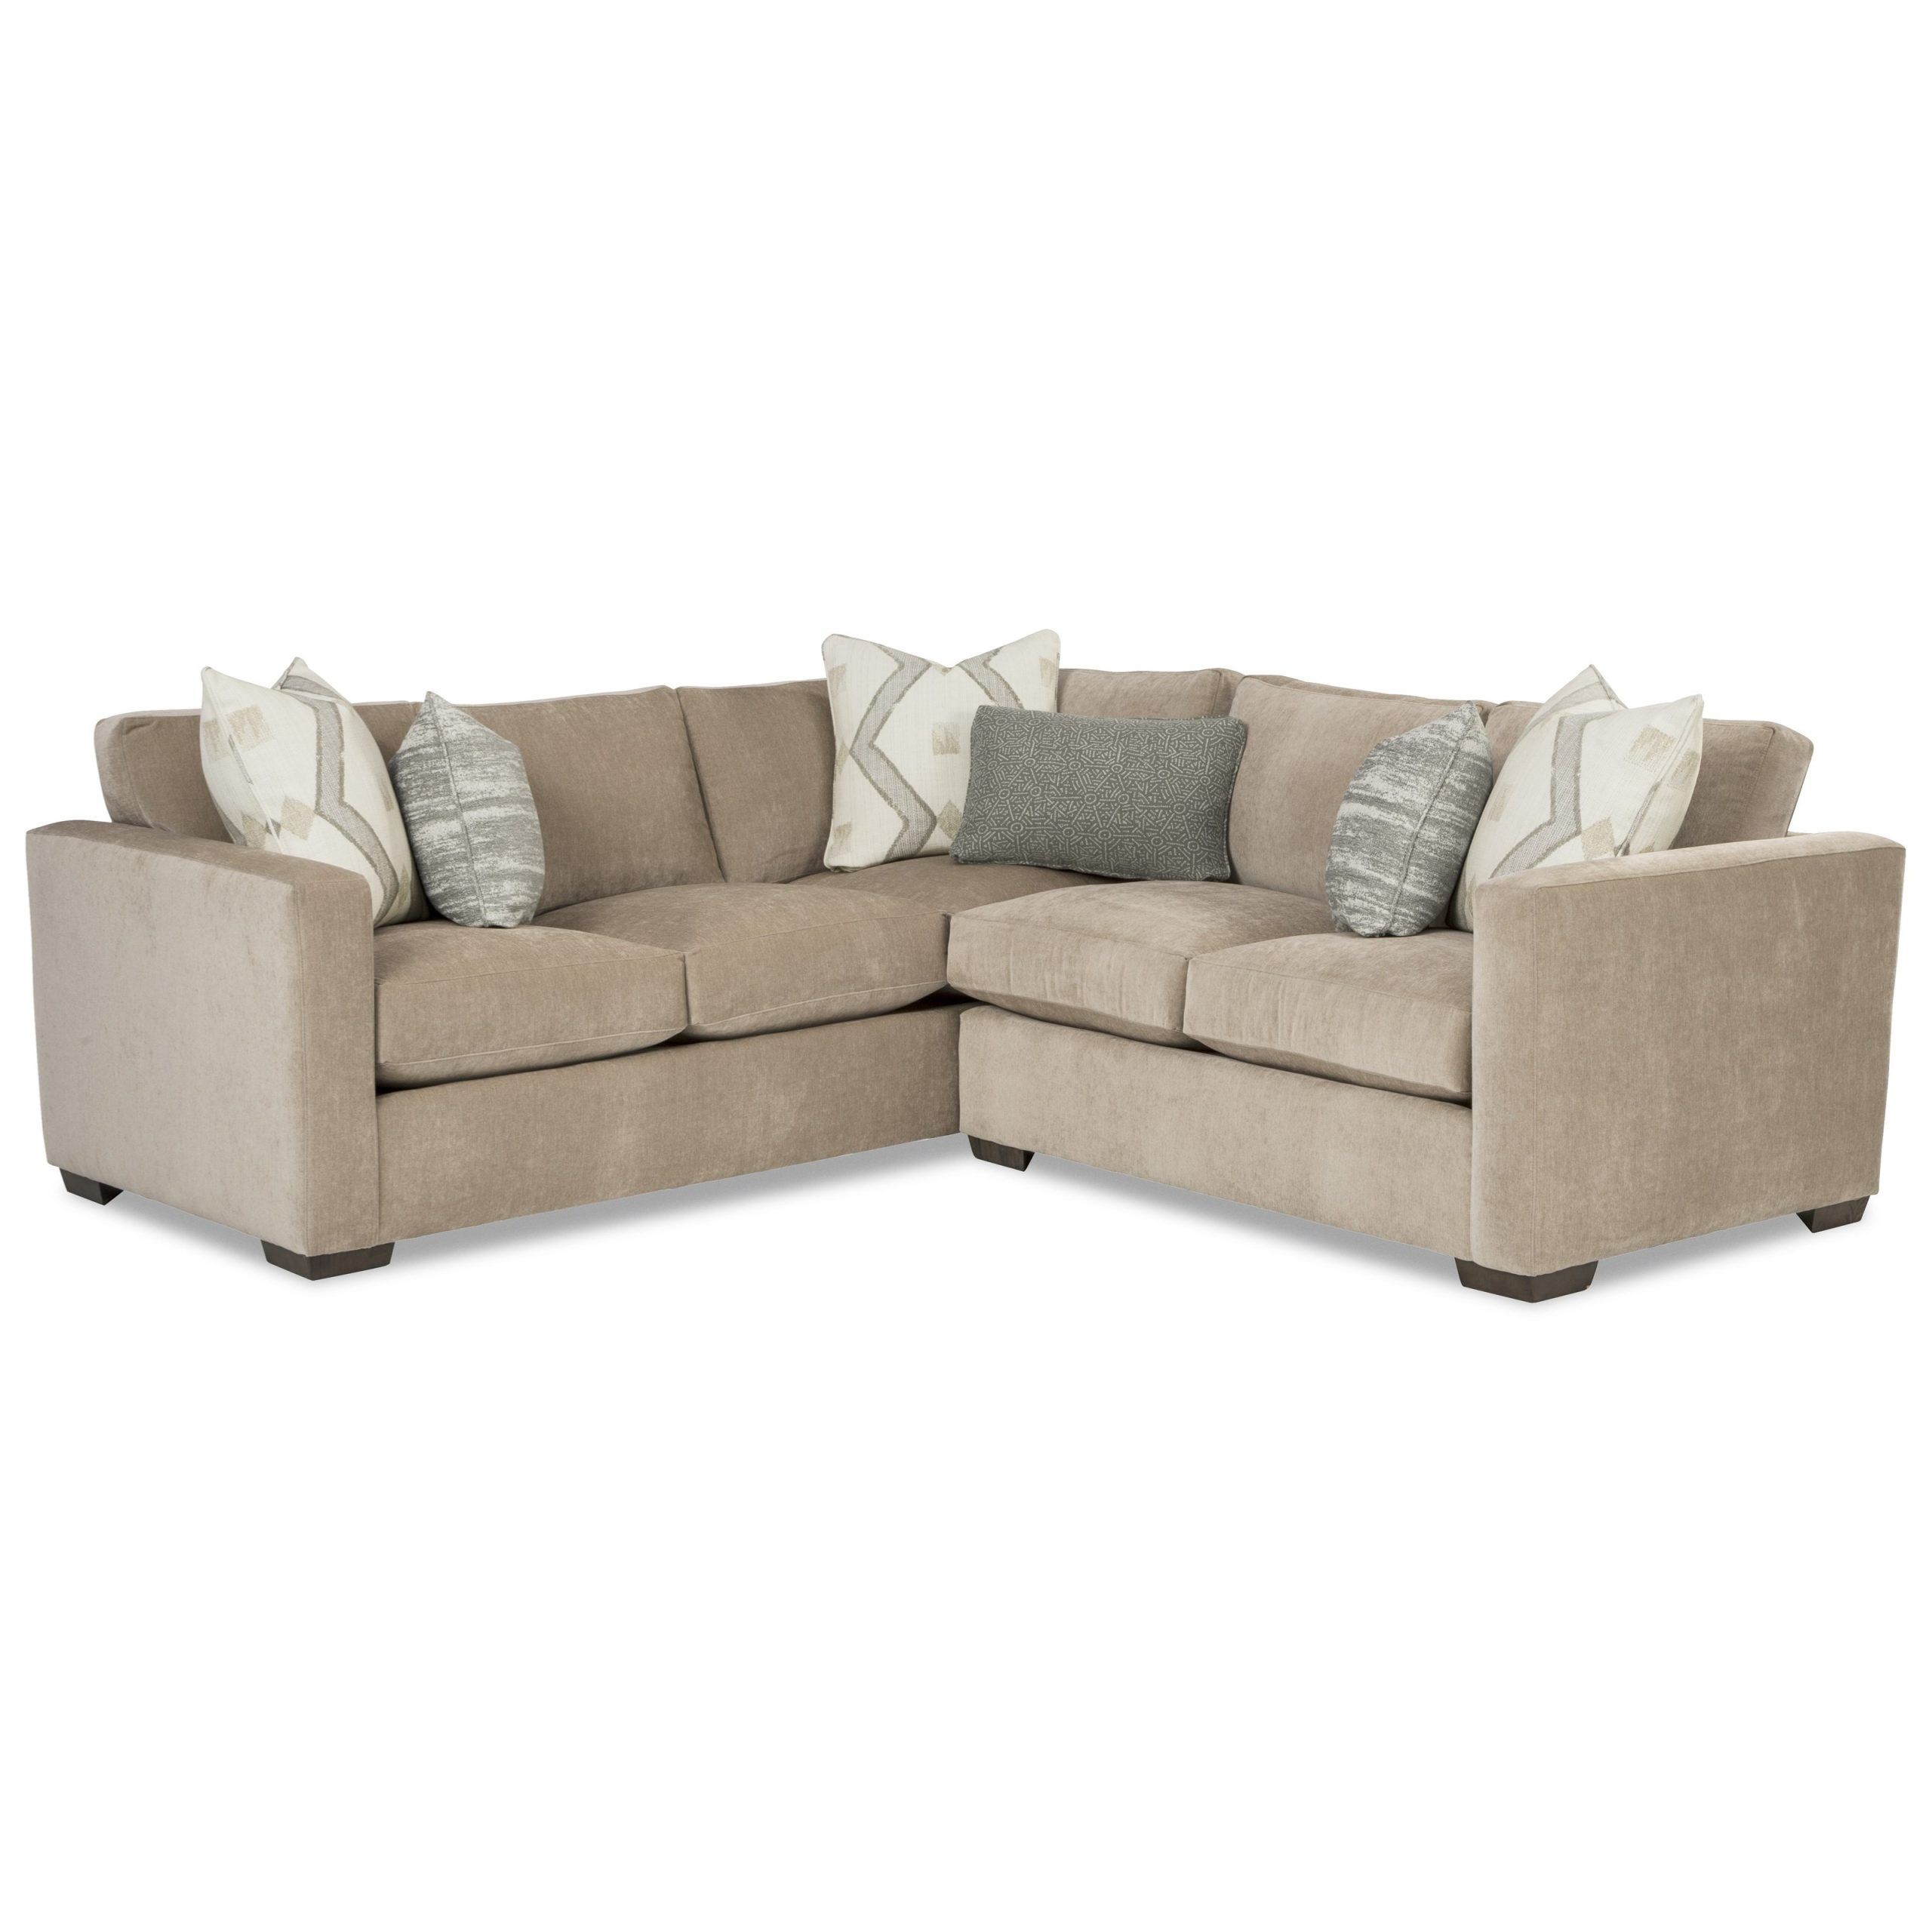 Craftmaster 792750bd Contemporary 2 Piece Sectional With Raf Corner Inside Microfiber Sectional Corner Sofas (Gallery 12 of 20)